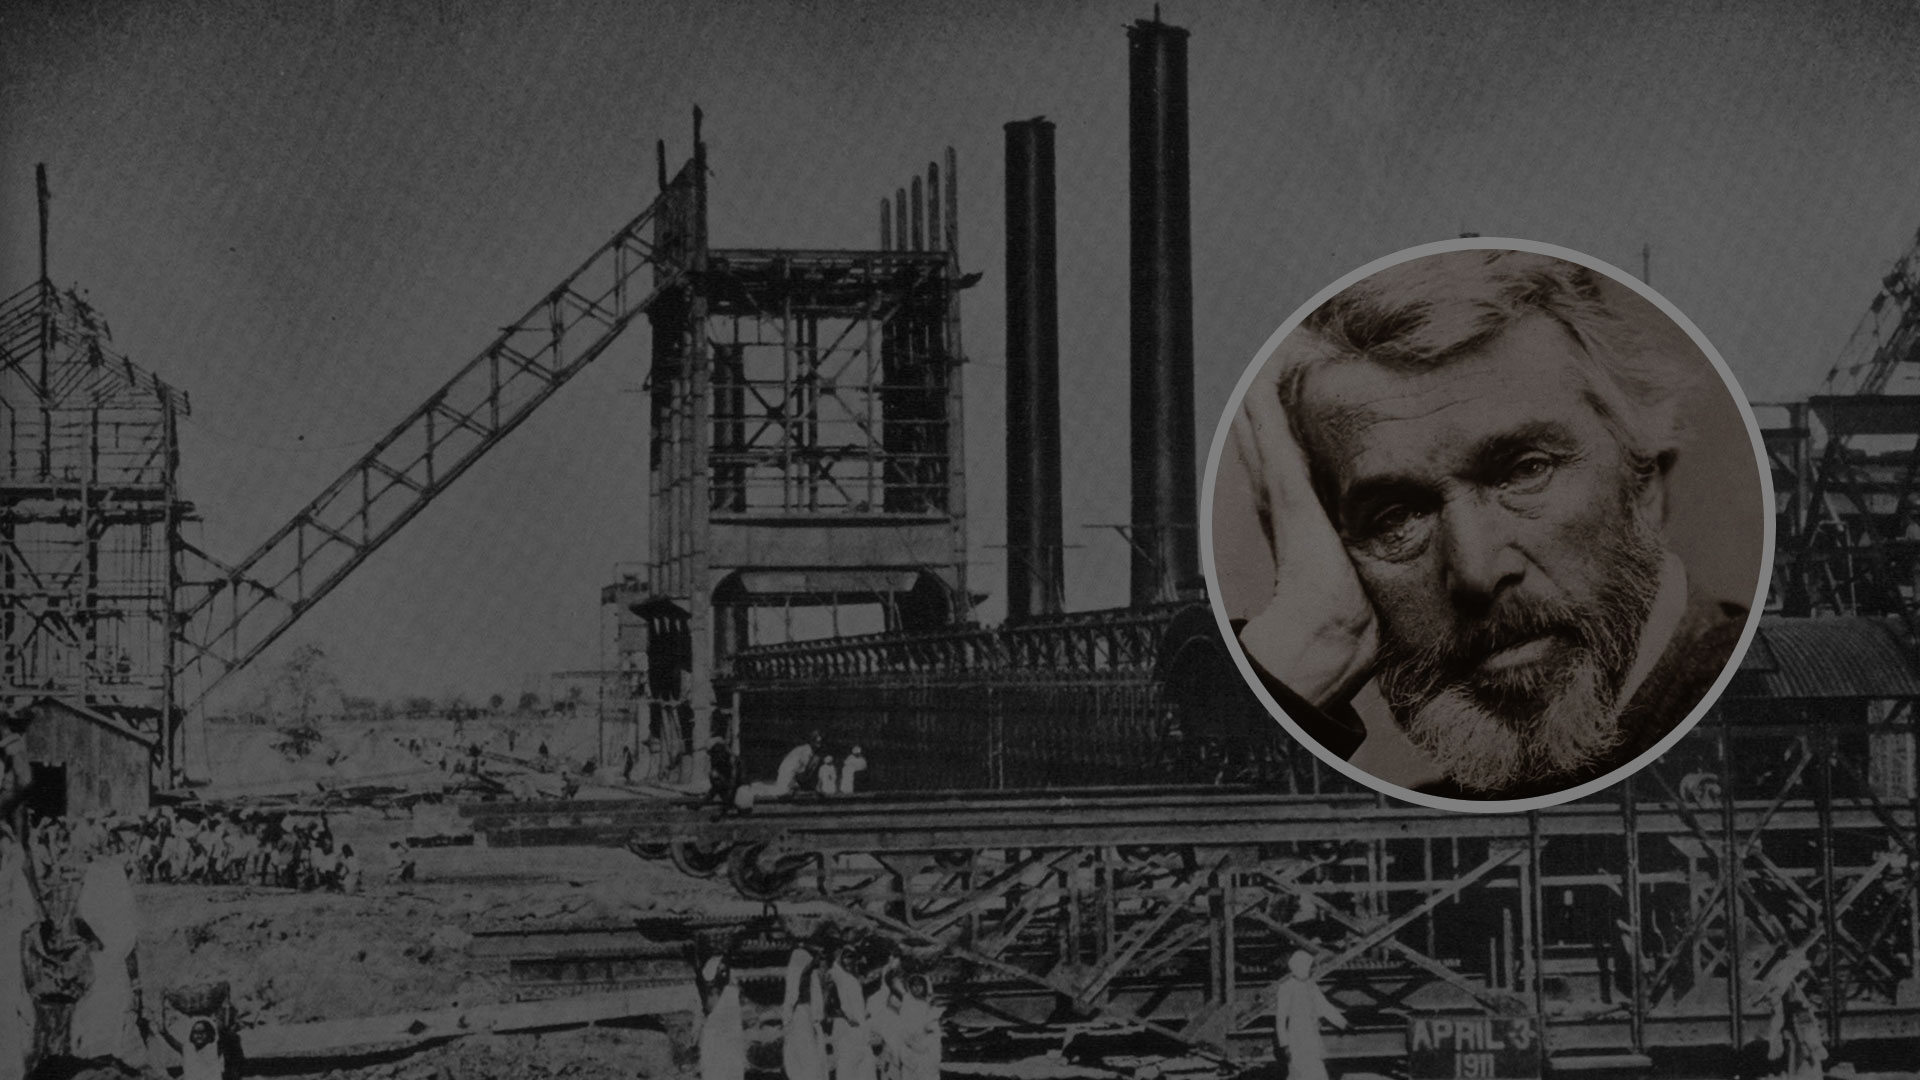 thomas carlyle's lecture inspired jamsetji to build tata steel